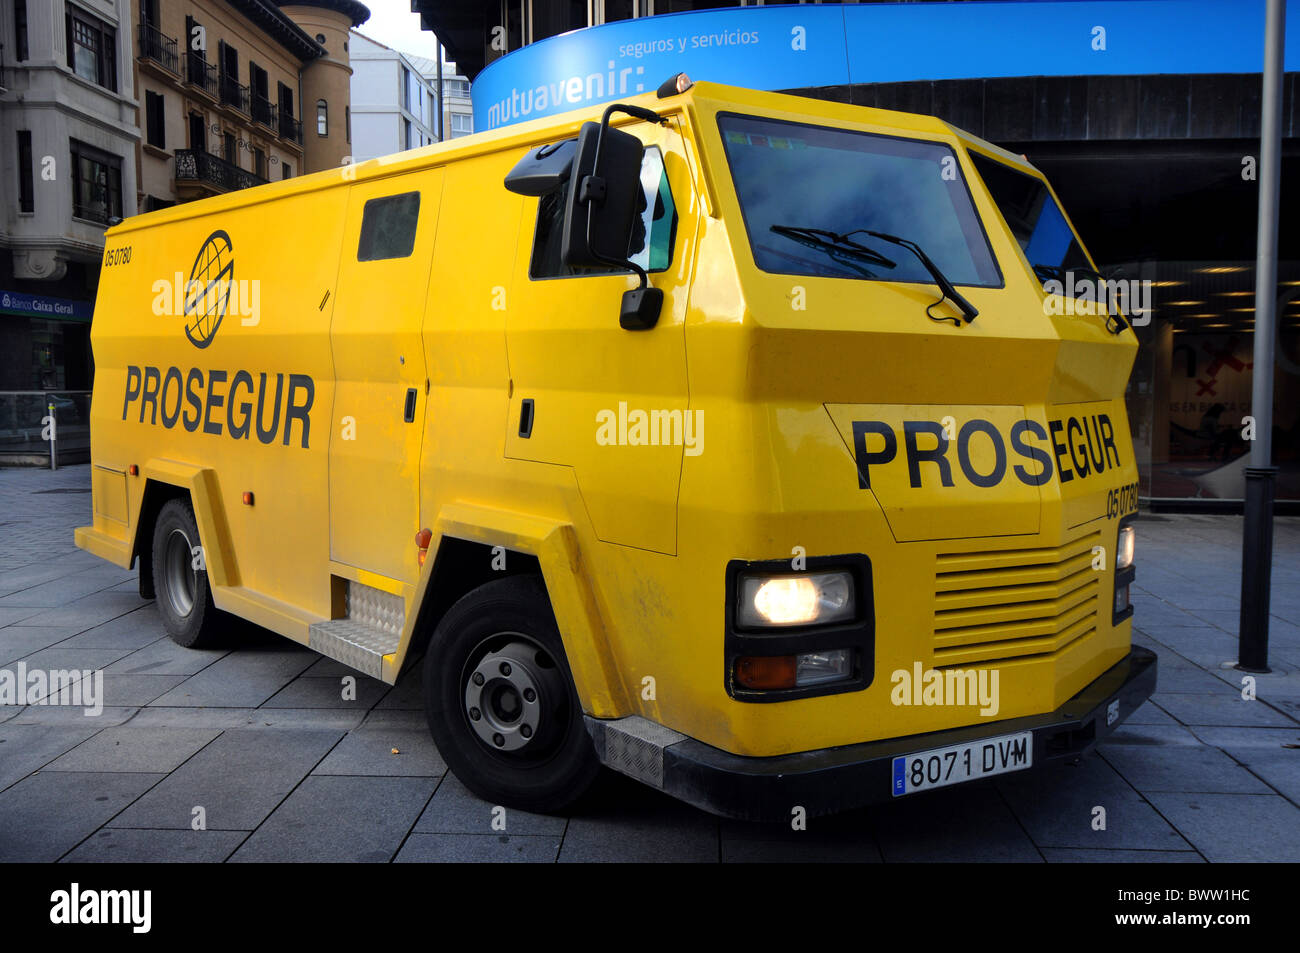 armoured-truck-security-cash-truck-delivering-money-to-a-bank-in-spain-BWW1HC.jpg